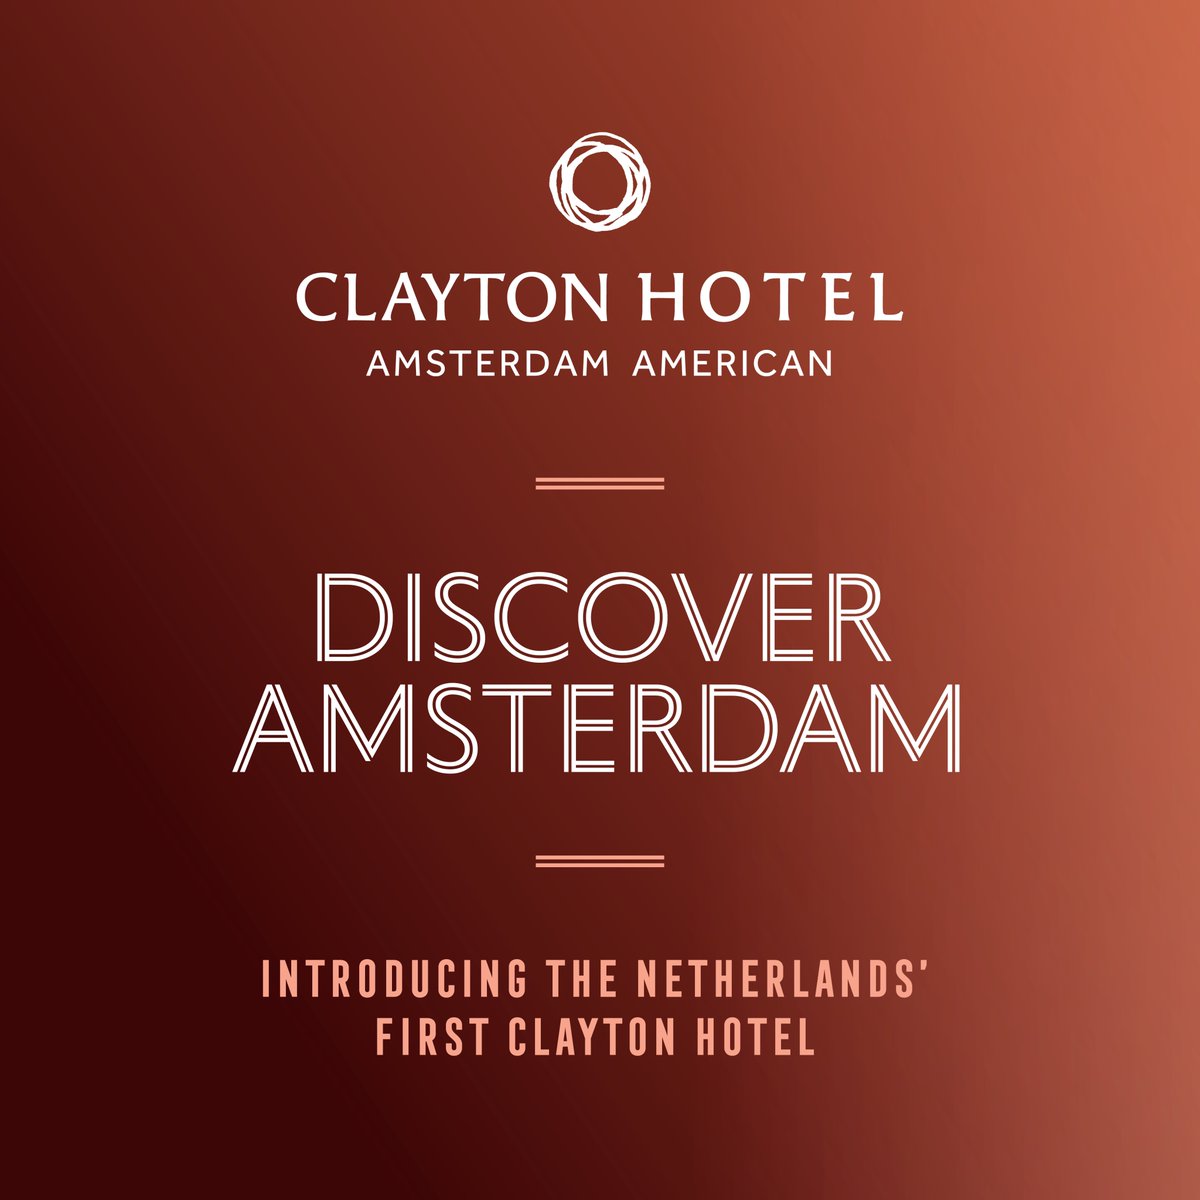 Today Clayton Hotel Amsterdam American joins the Clayton Hotels family! Overlooking Leidseplein Square, Leidsekade Canal and home to the iconic Art Nouveau style Café and Bar Americain — we're excited to welcome you to this stunning hotel. claytonhotelamsterdam.com #ClaytonHotels